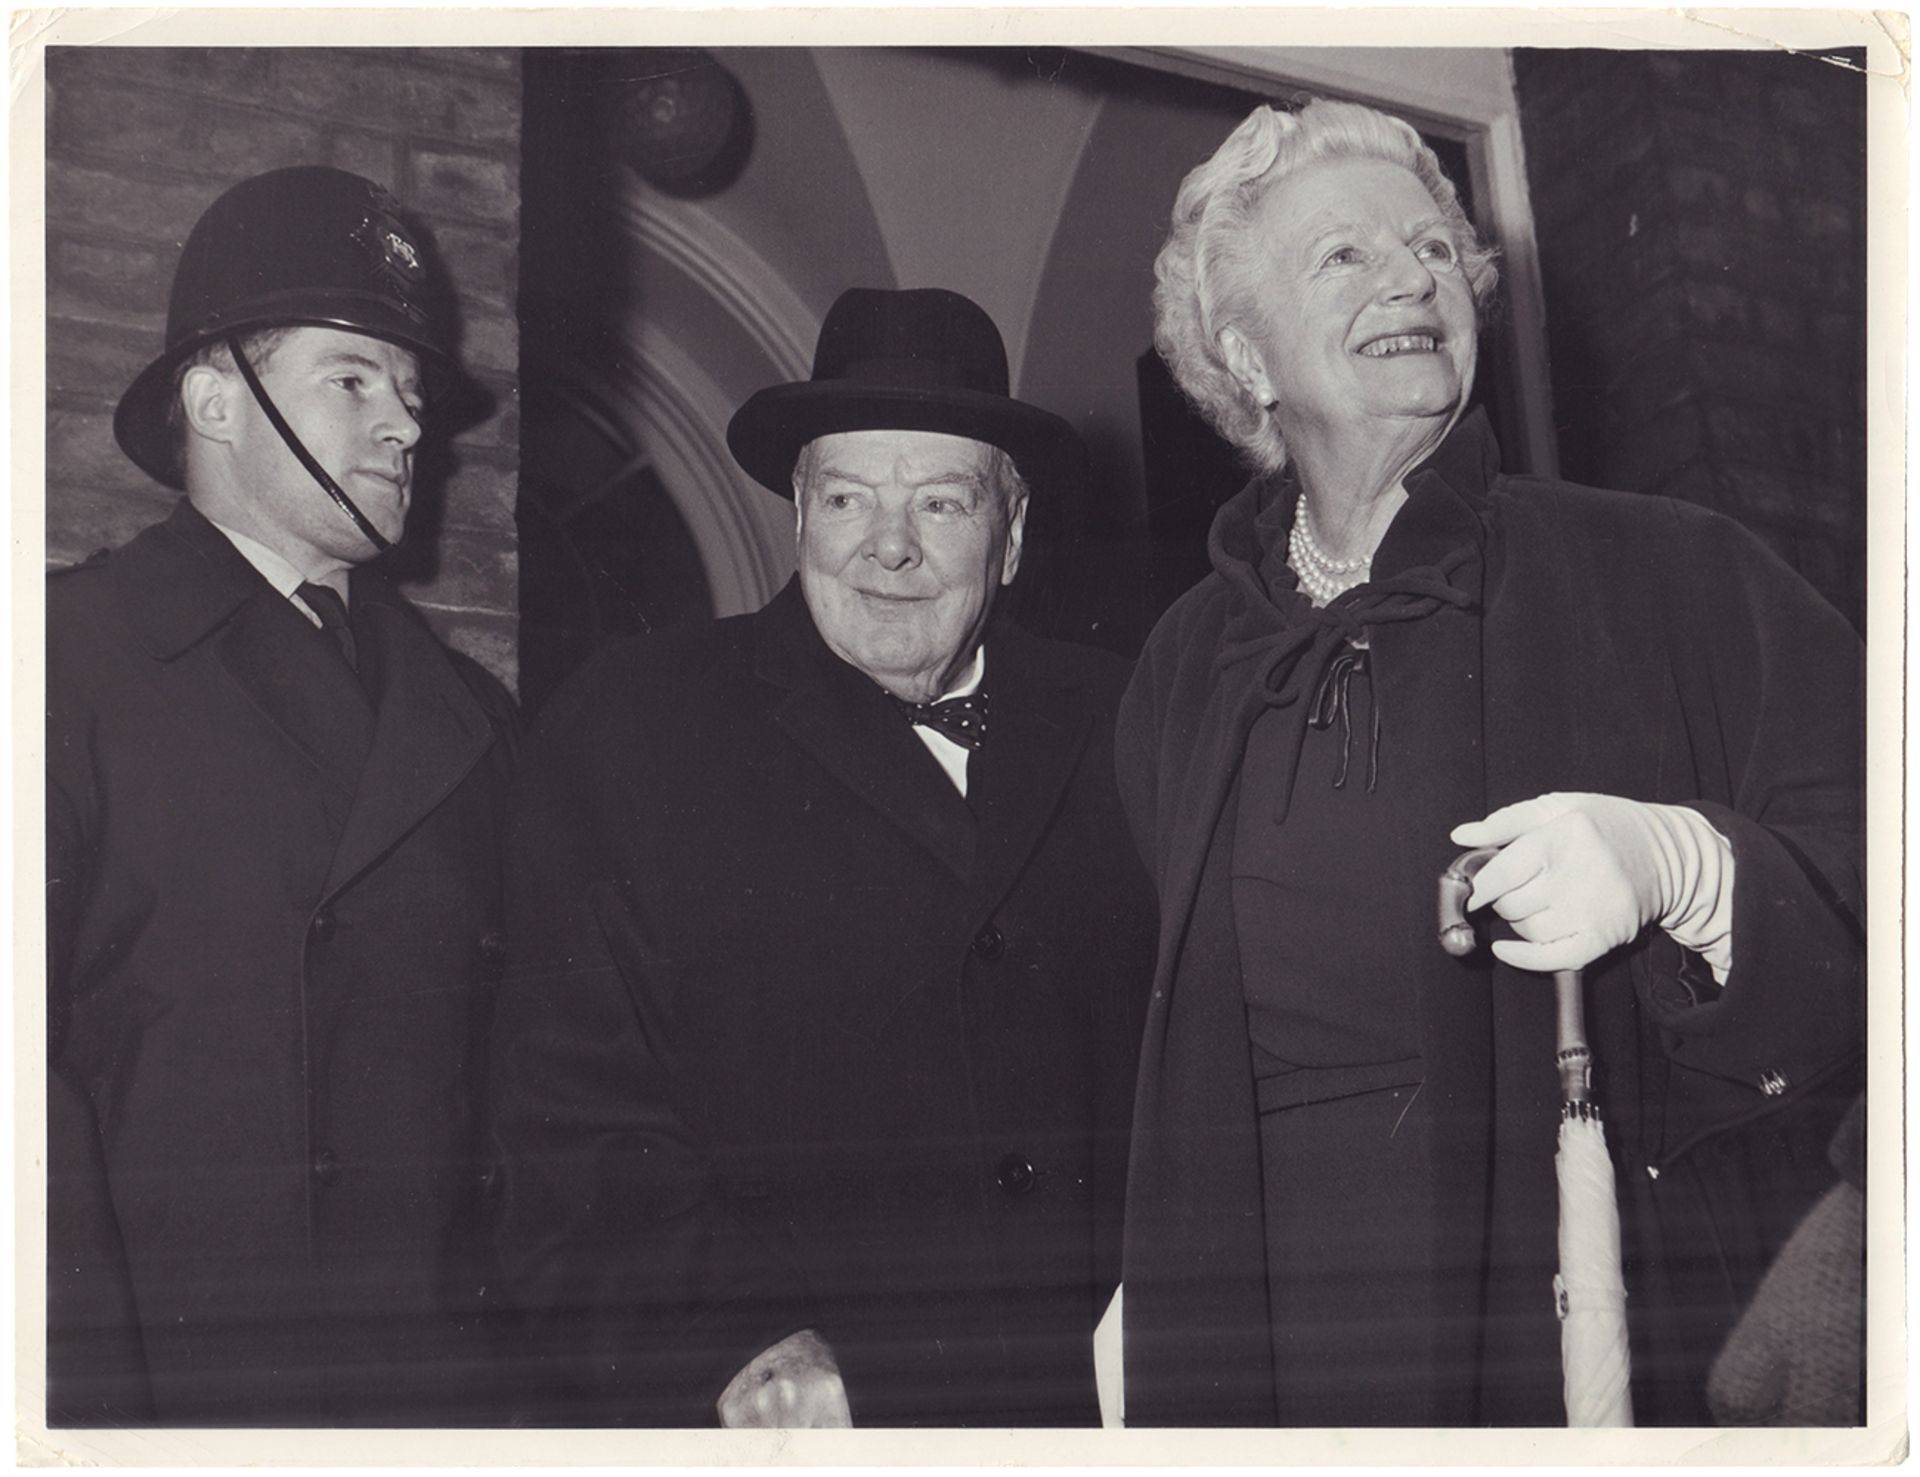 Photograph "Sir Winston Churchill in his 87th Birthday with his wife Clementine Churchill". 1961. 17